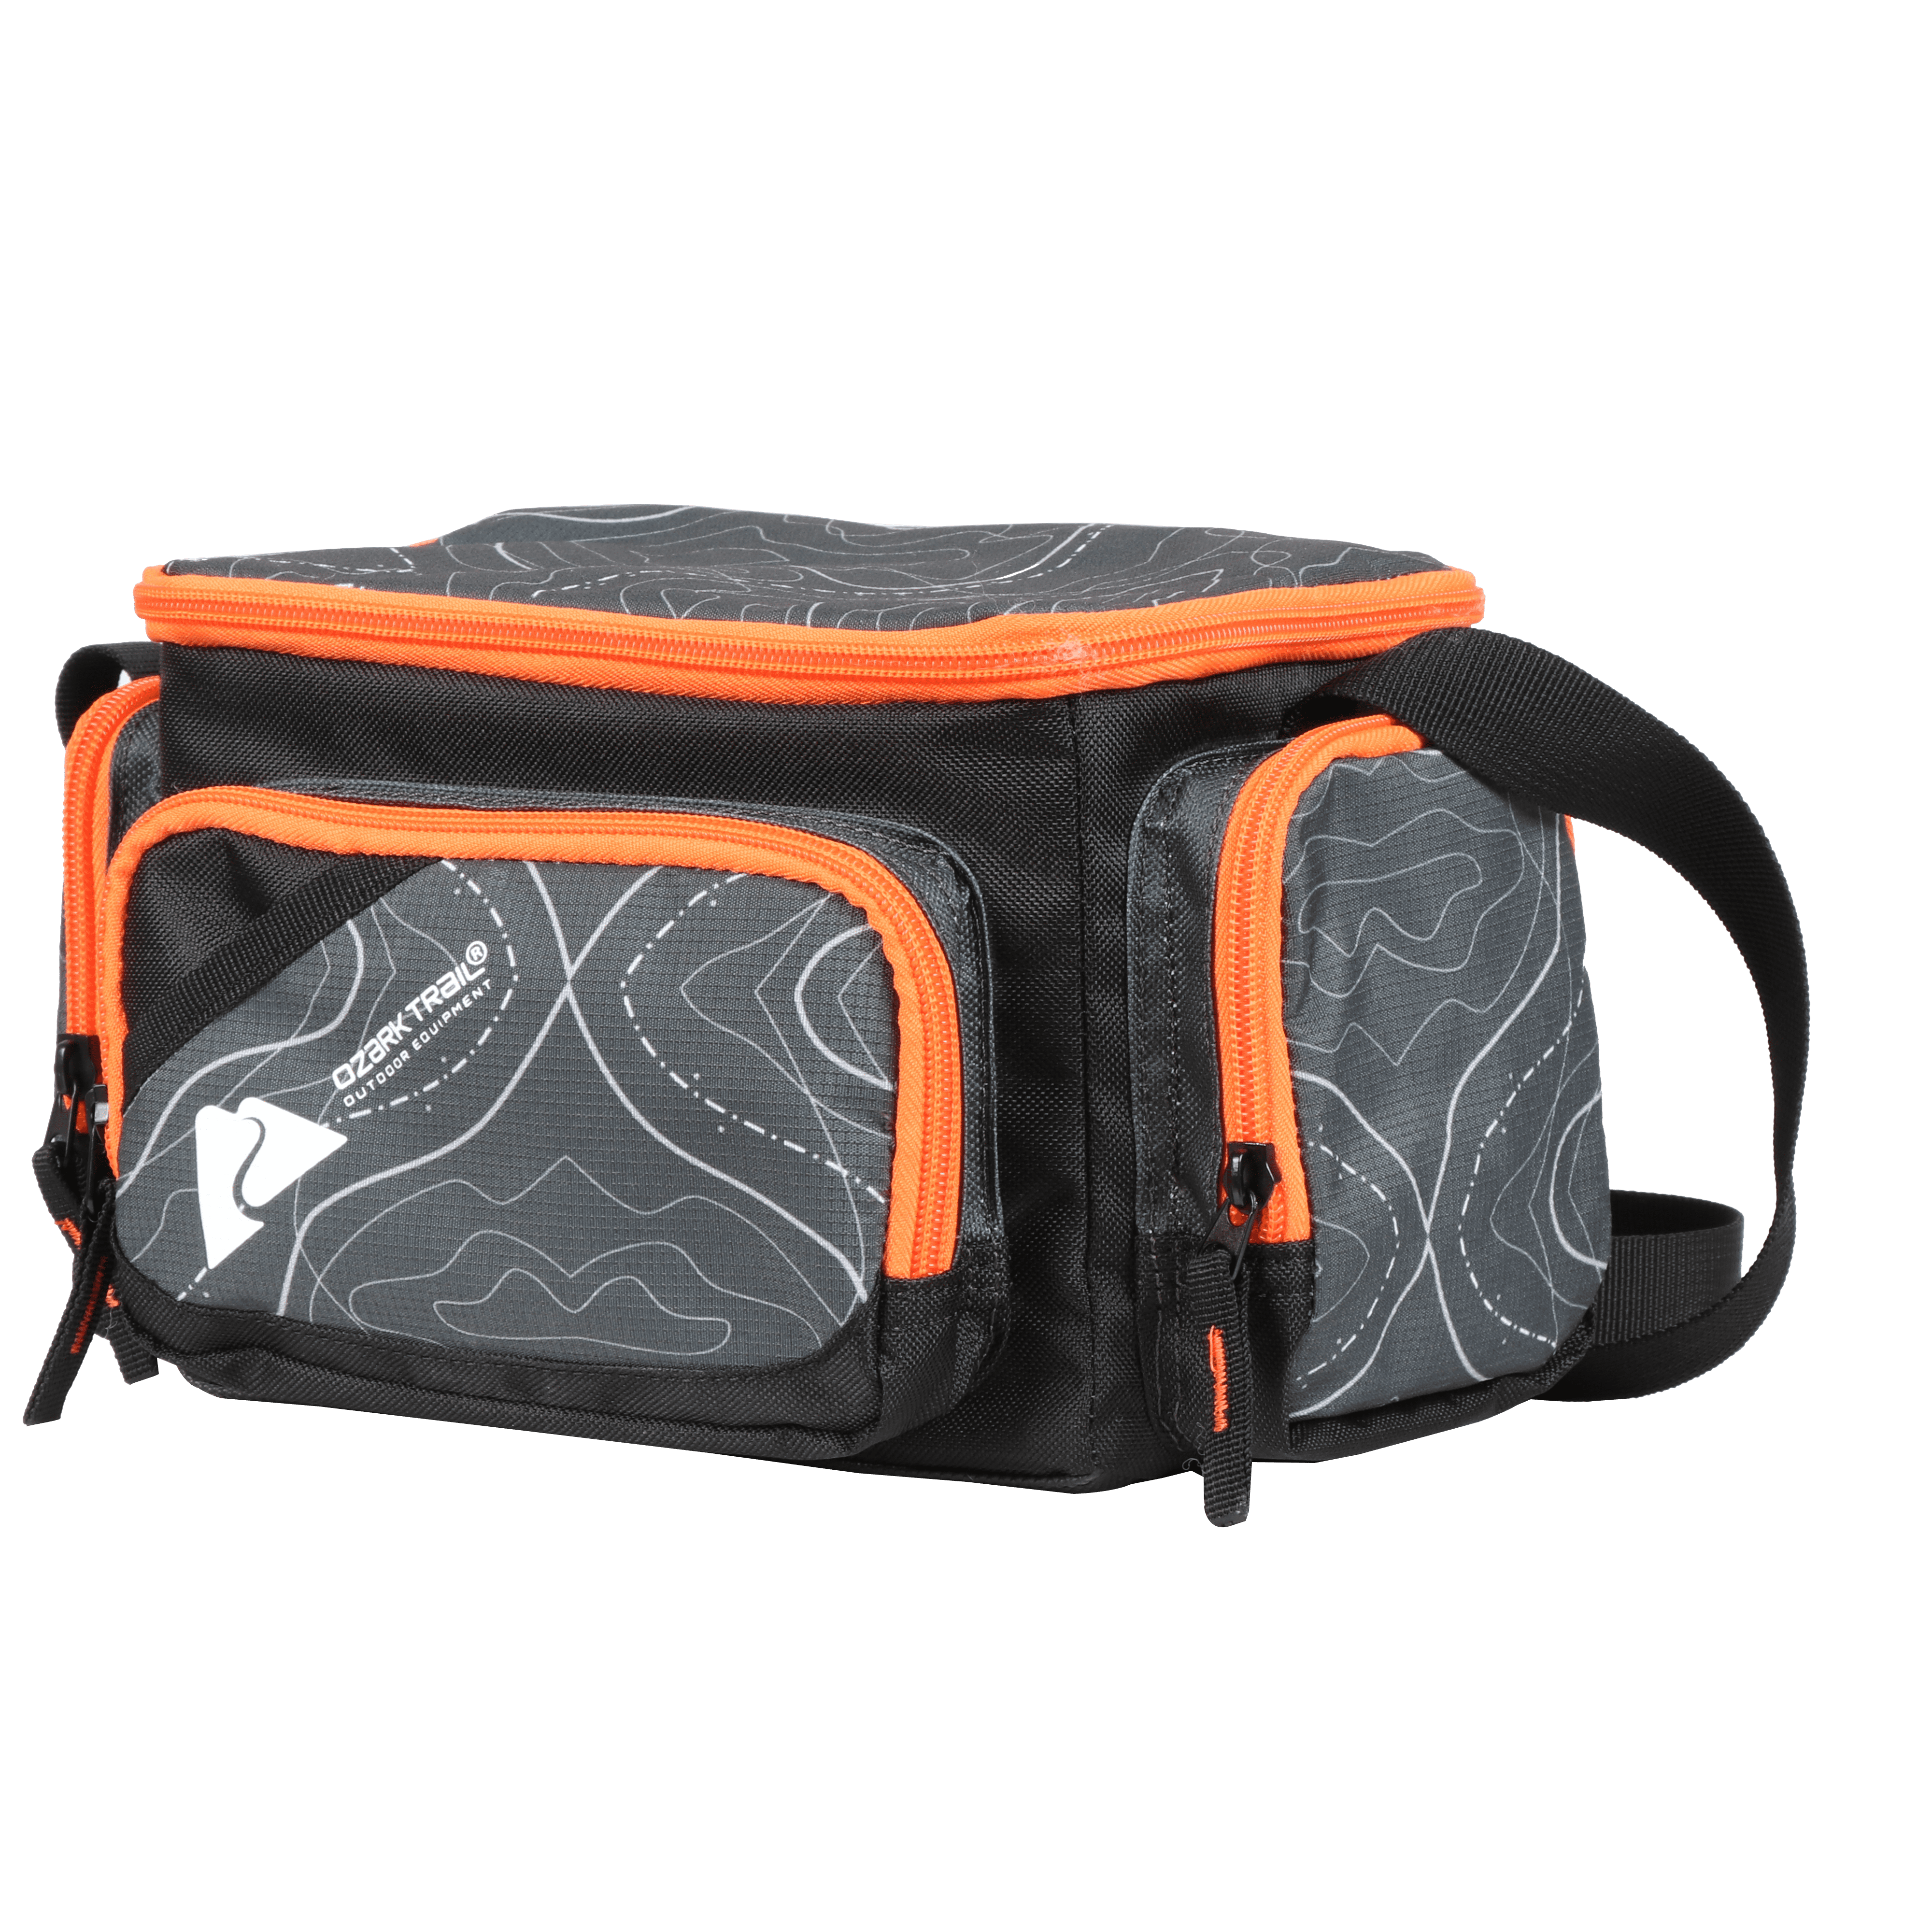 Ozark Trail Soft-sided 350 Fishing Tackle Bag with 3 Tackle Boxes, Black